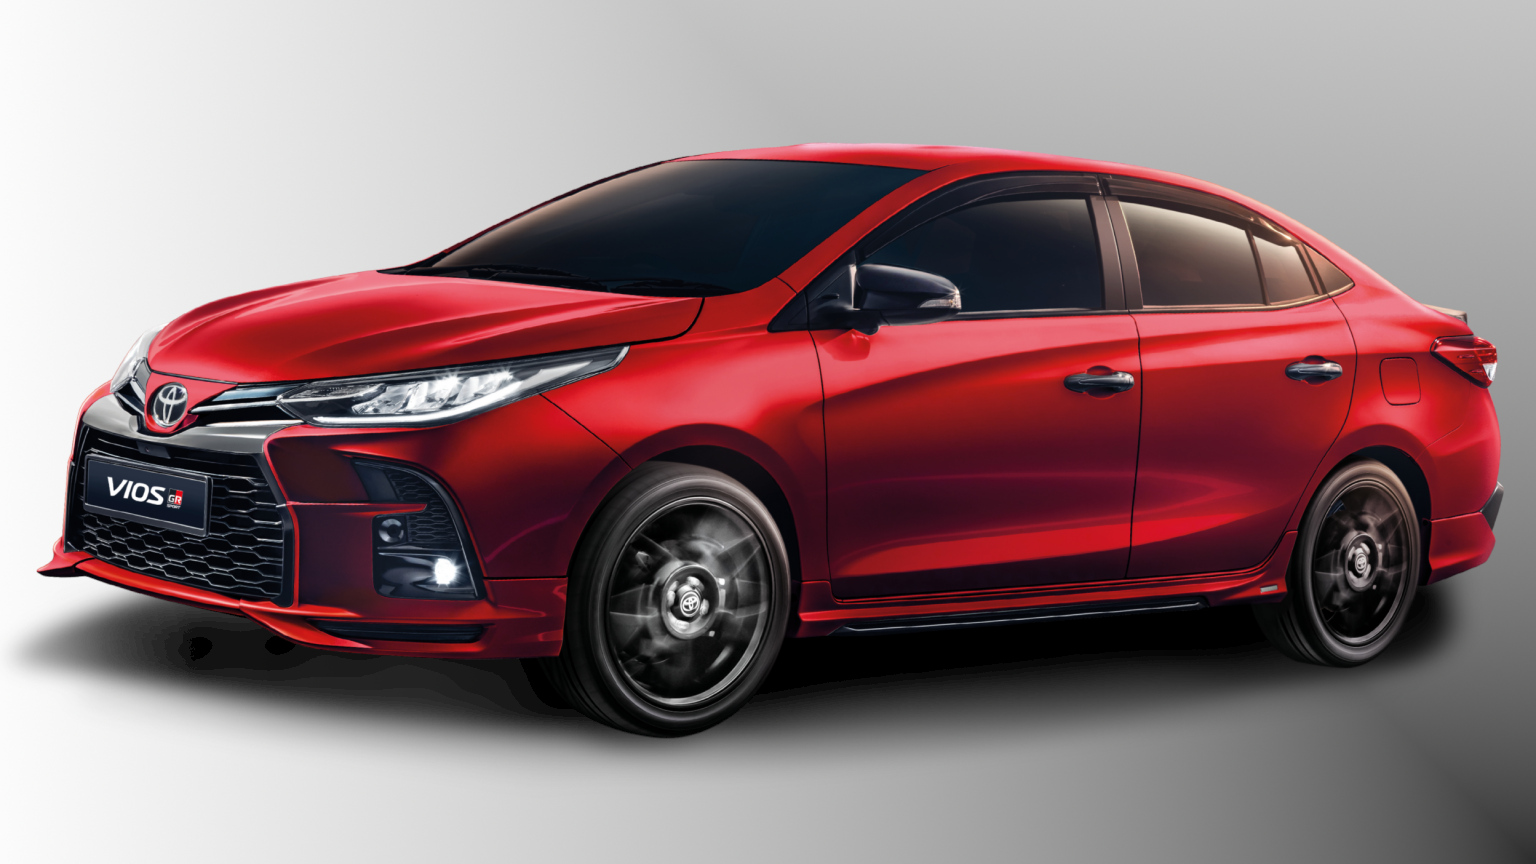 The Toyota Vios GR-S